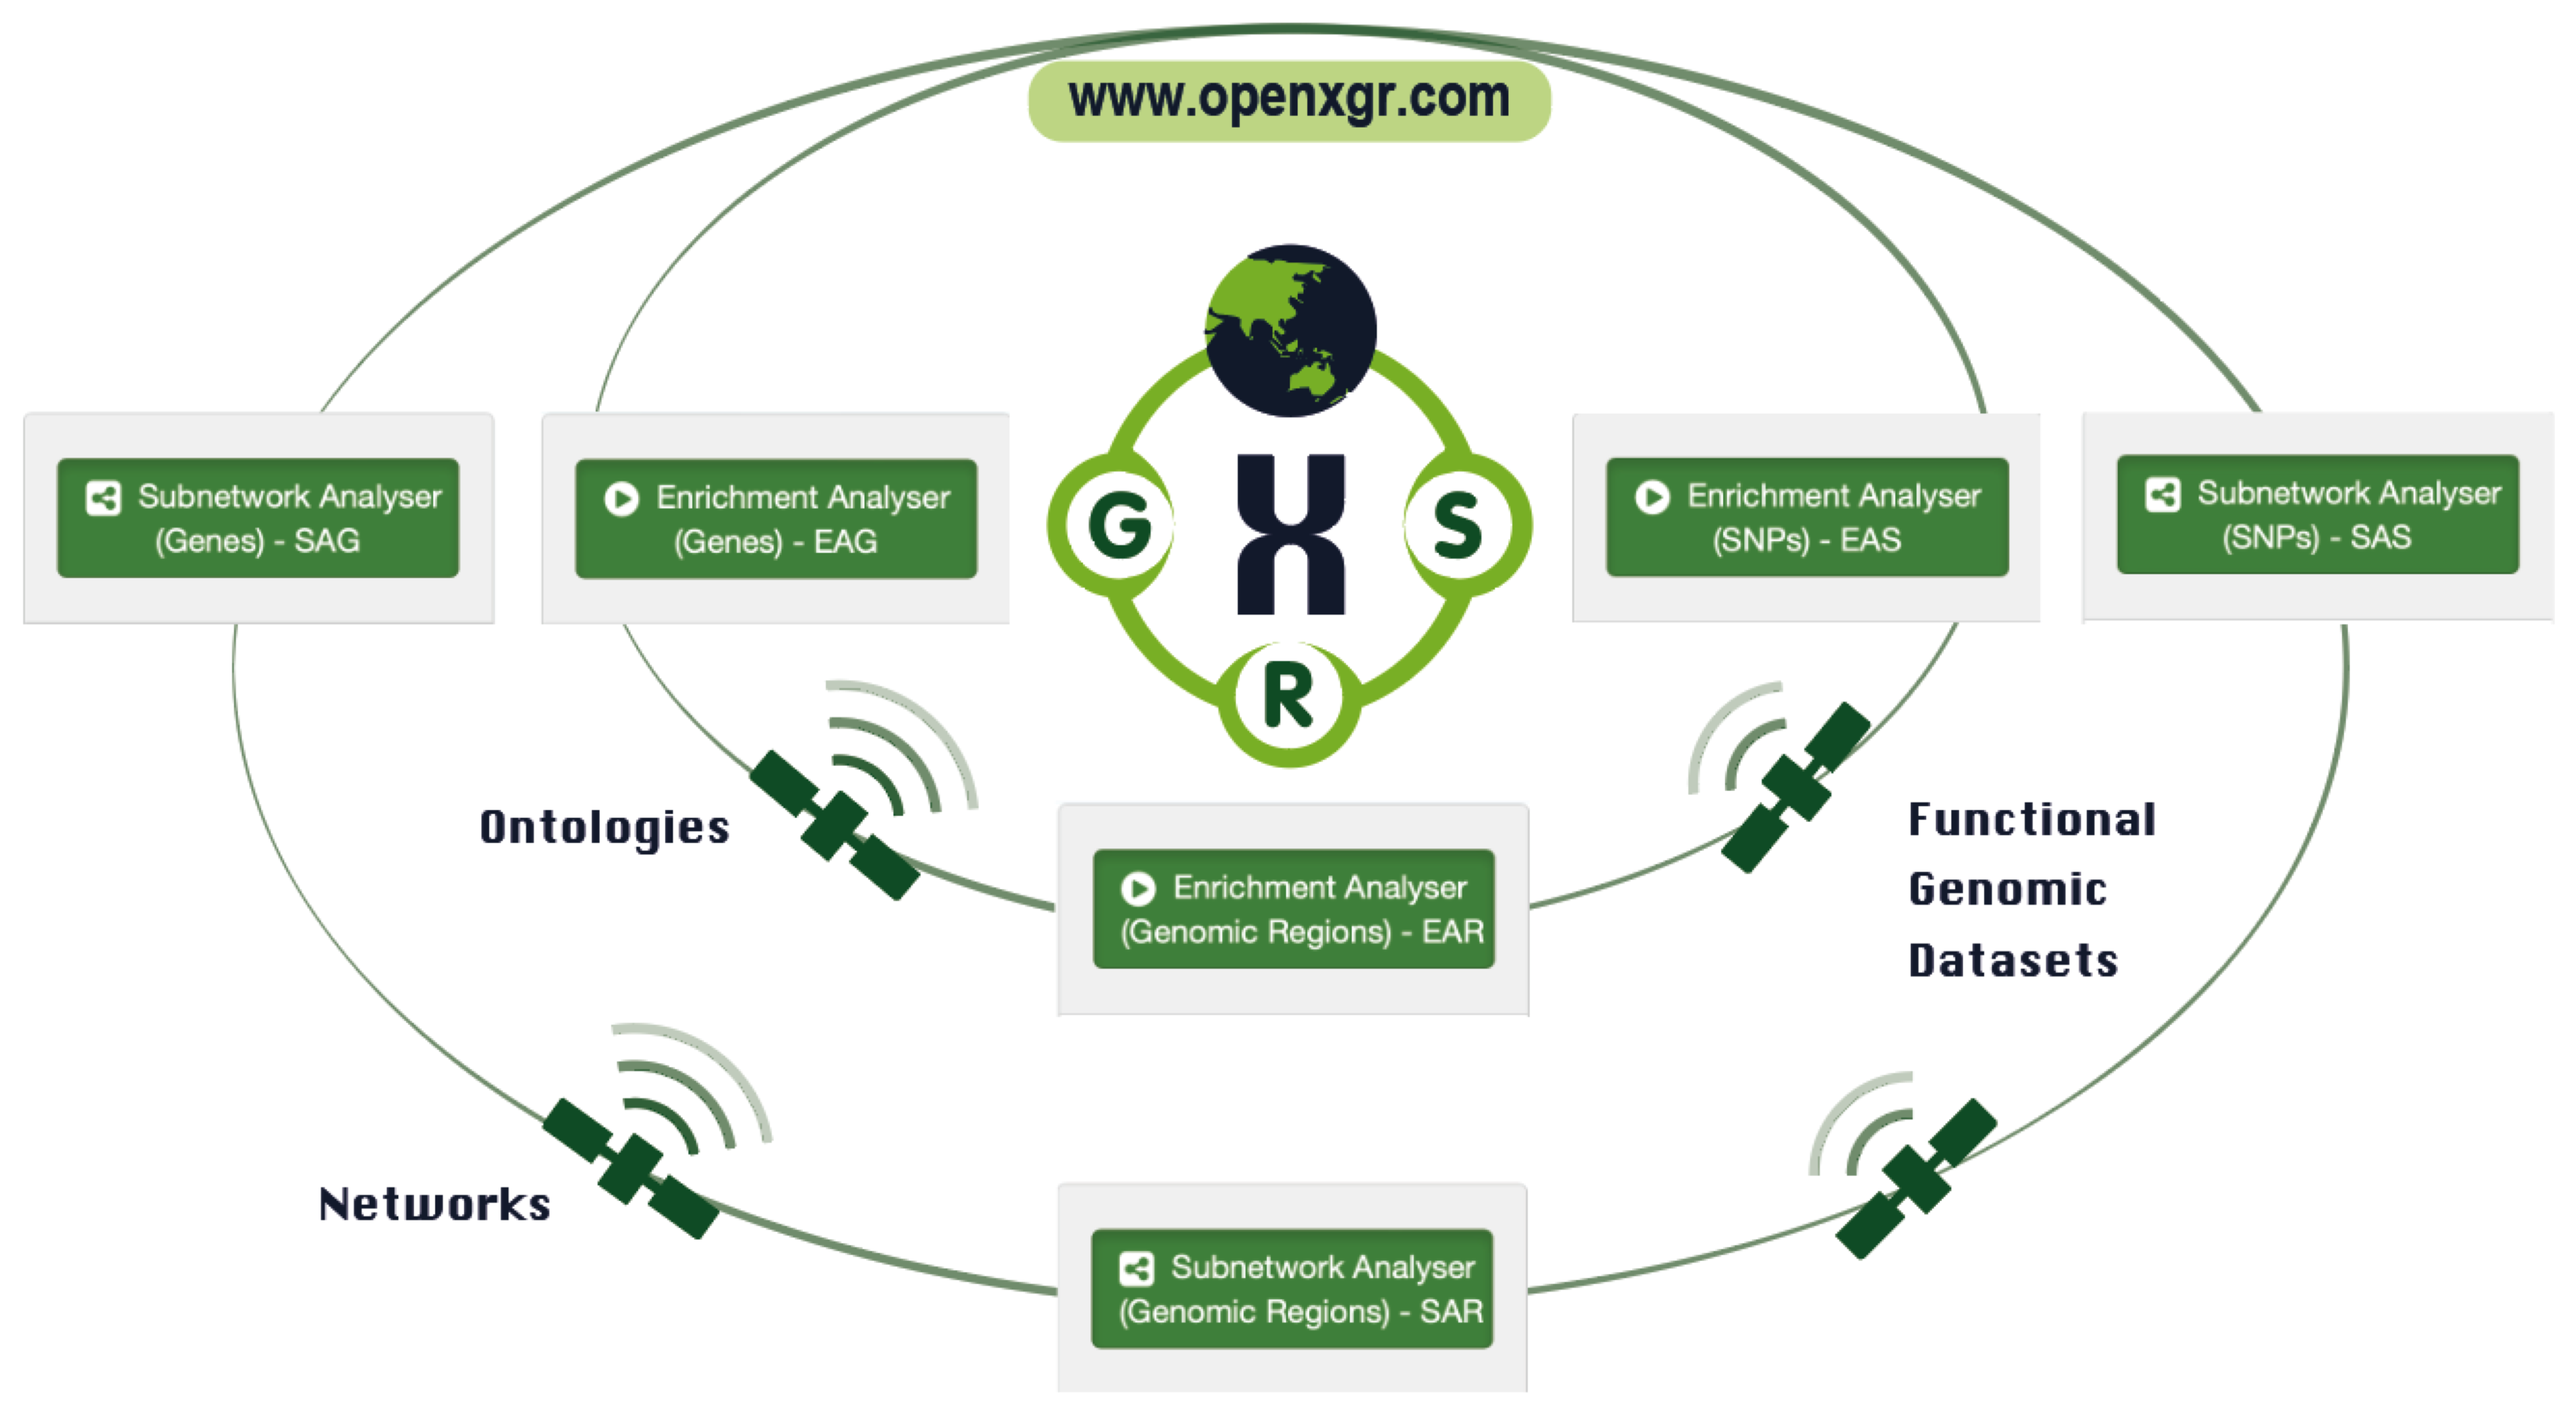 The OpenXGR web server is depicted as our 'Earth' in the sense that it comprises six analysers designed to interpret summary-level genomic data related to genes (G), SNPs (S), and genomic regions (R). Similar to satellites that orbit our planet and provide real-time information, OpenXGR leverages knowledgebase on ontologies, networks, and functional genomic datasets to enable real-time enrichment and subnetwork analyses.